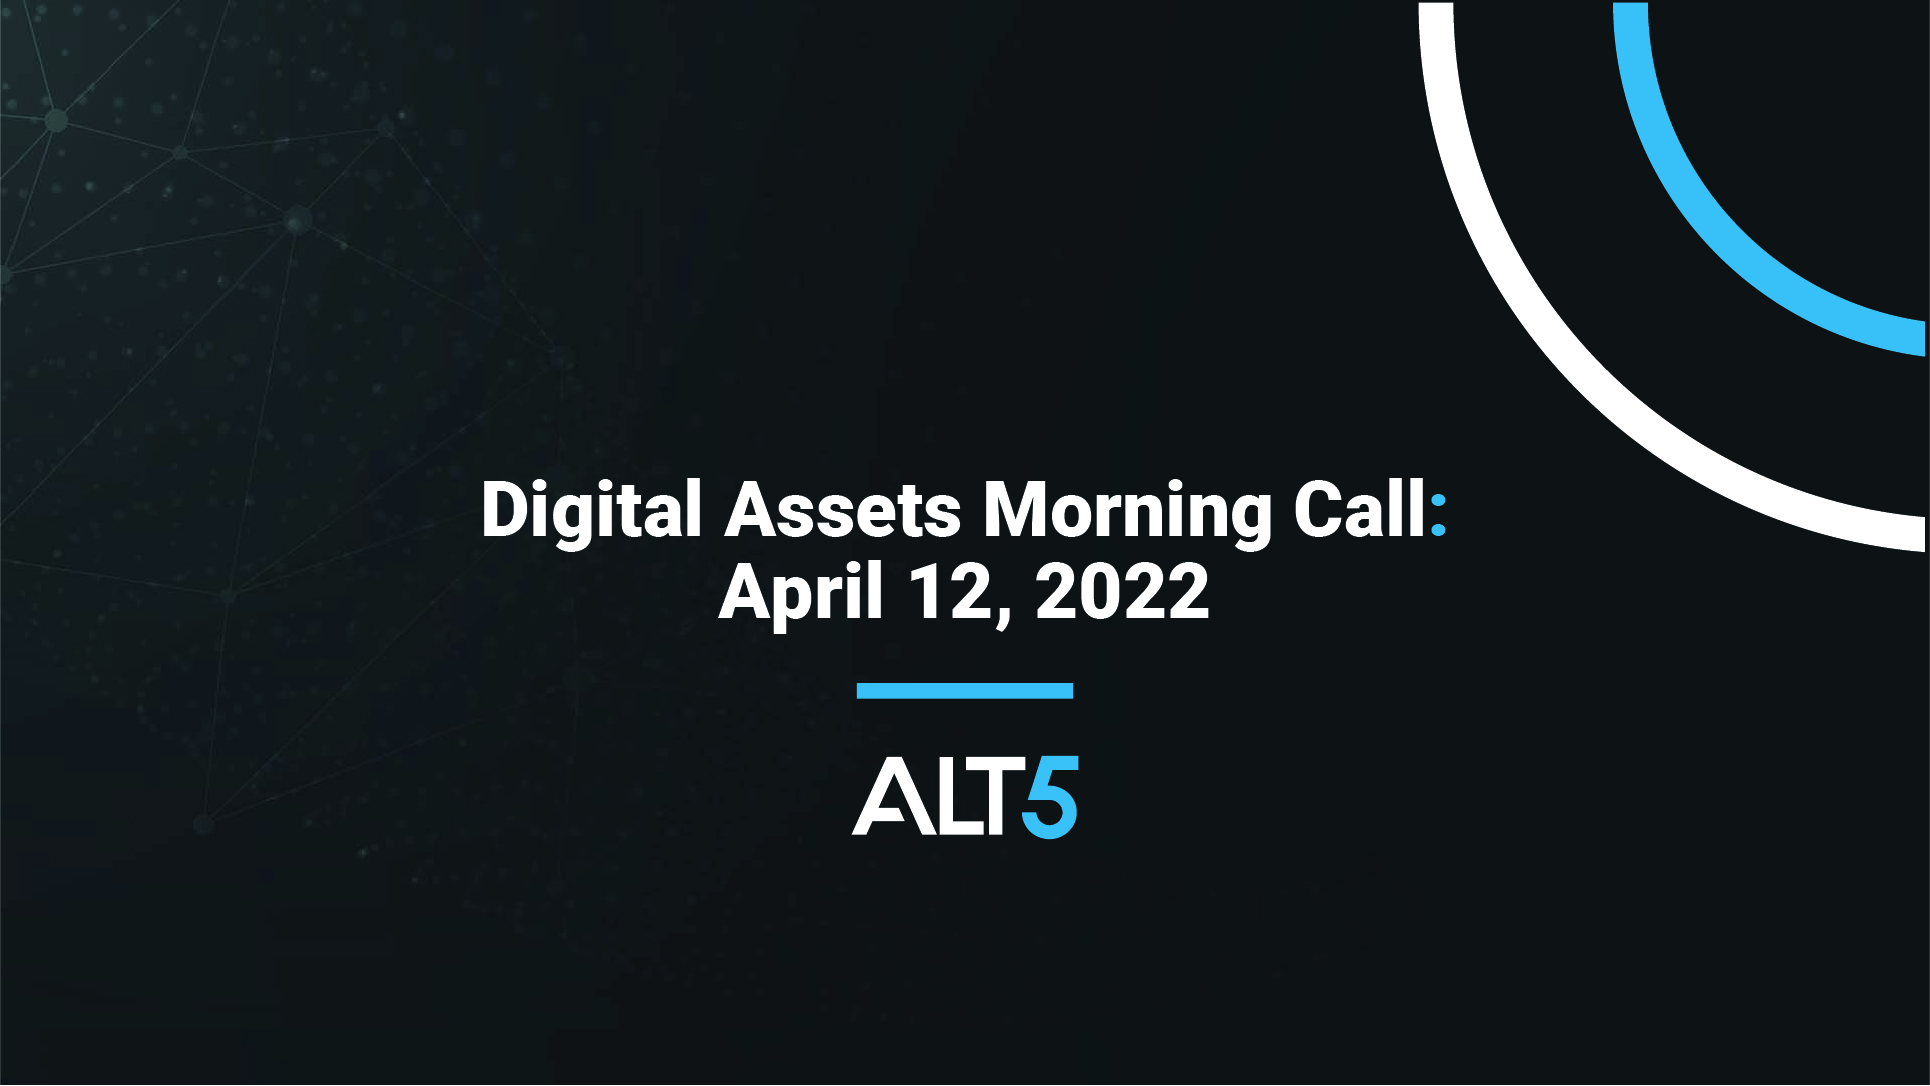 Digital Assets Morning Call - April 12 2022: Near-expected US inflation data allows relief gains in crypto prices